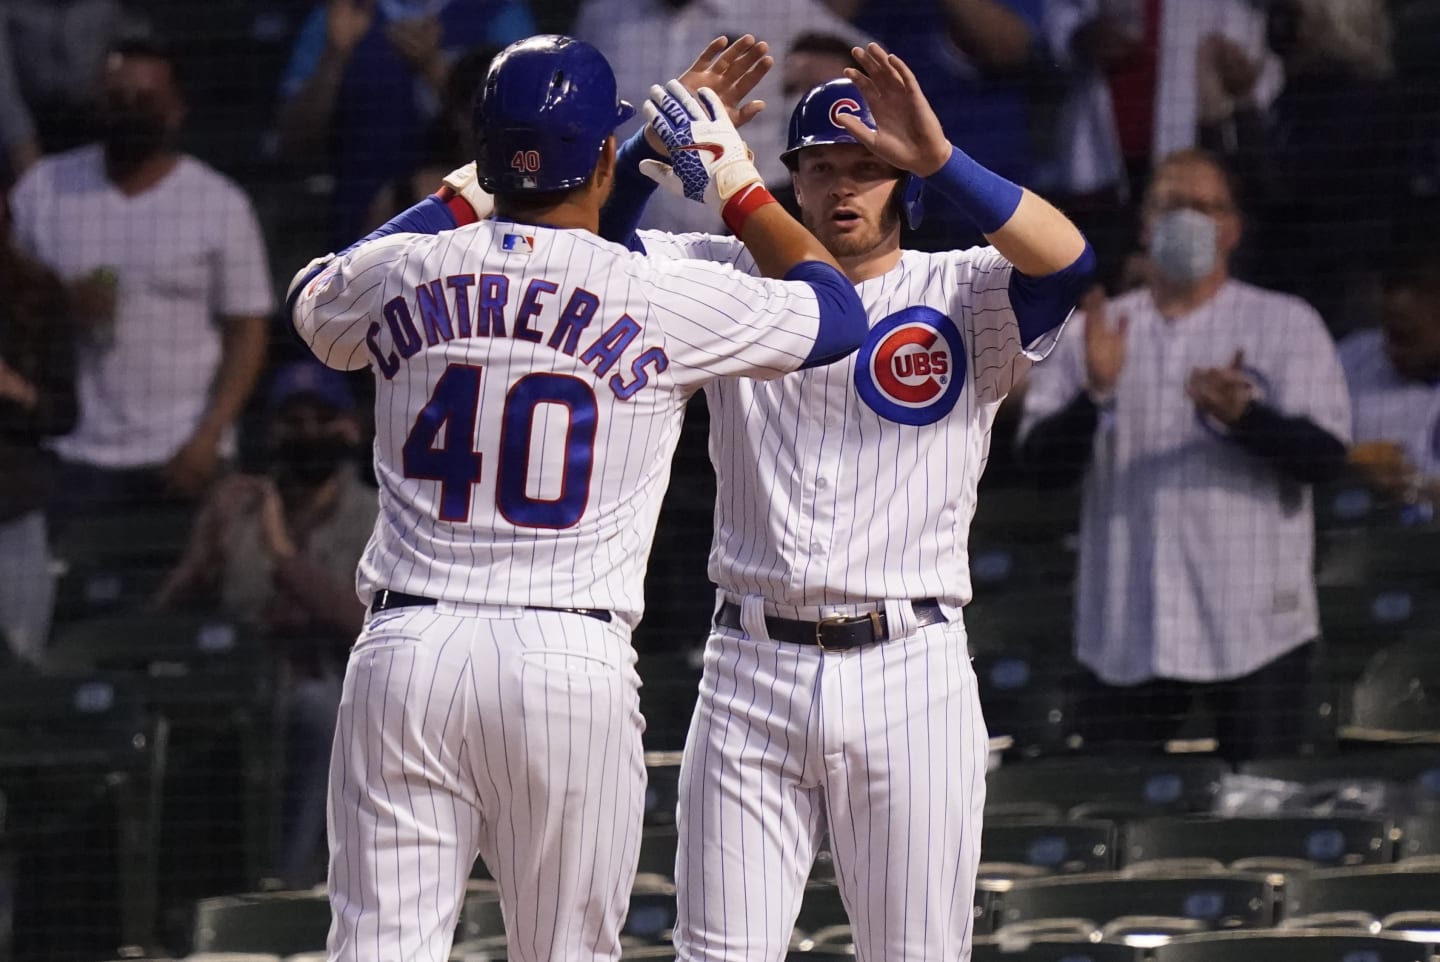 Cardinals set team record with 15th straight win, beat Cubs – KGET 17